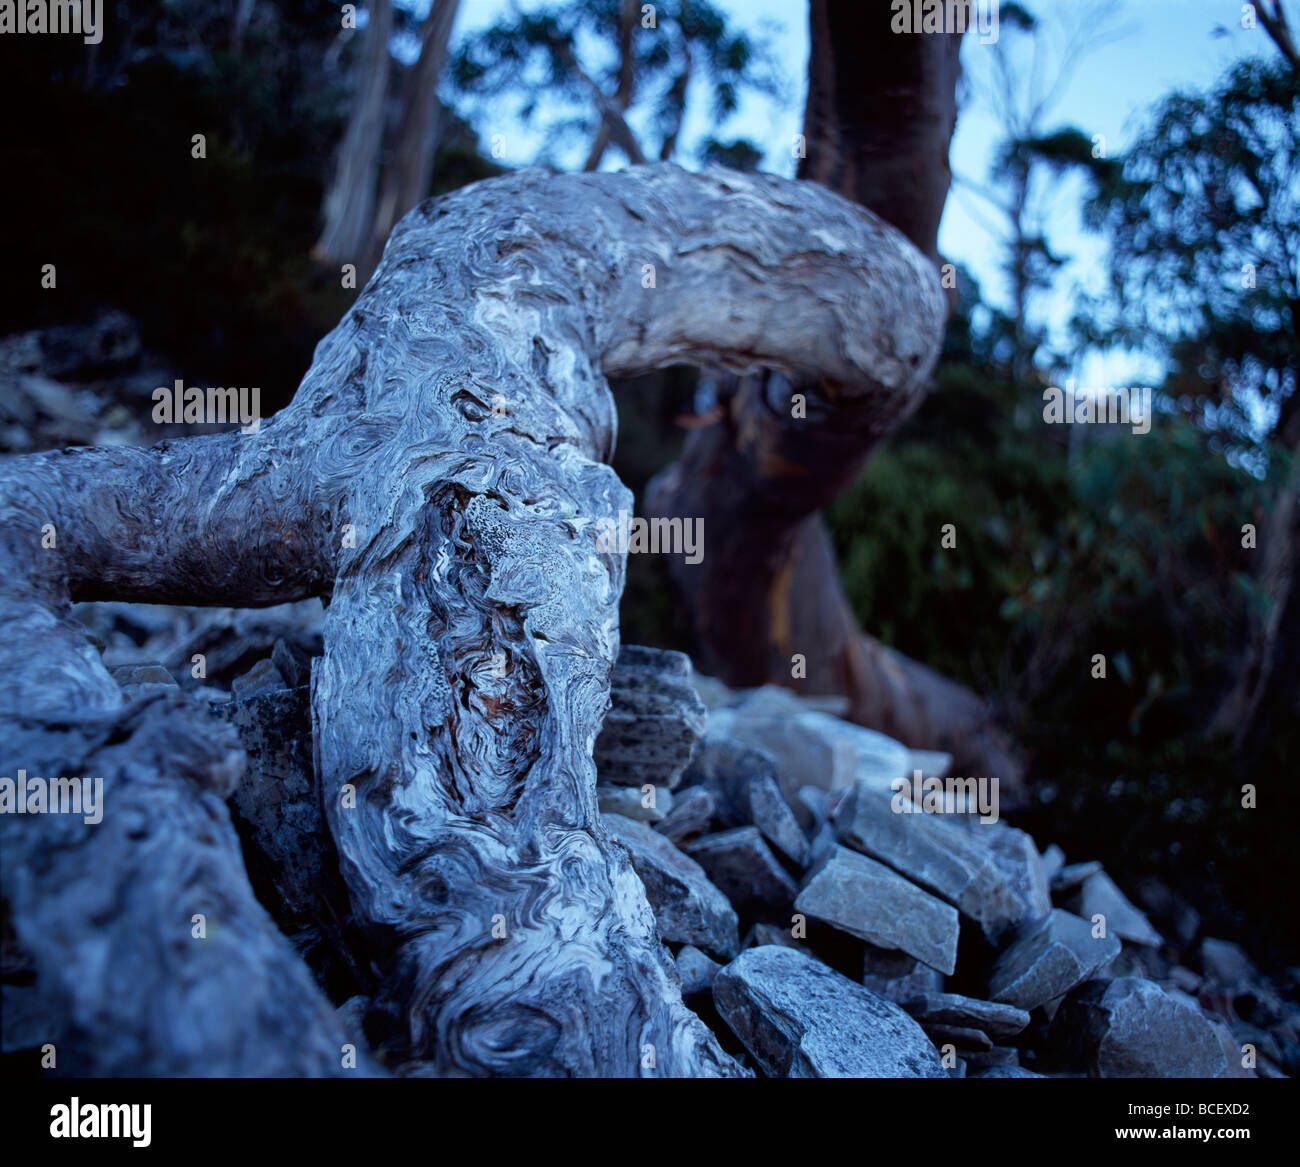 A Tasmanian Snow Gum tree trunk emerging from a rocky mountainside. Stock Photo